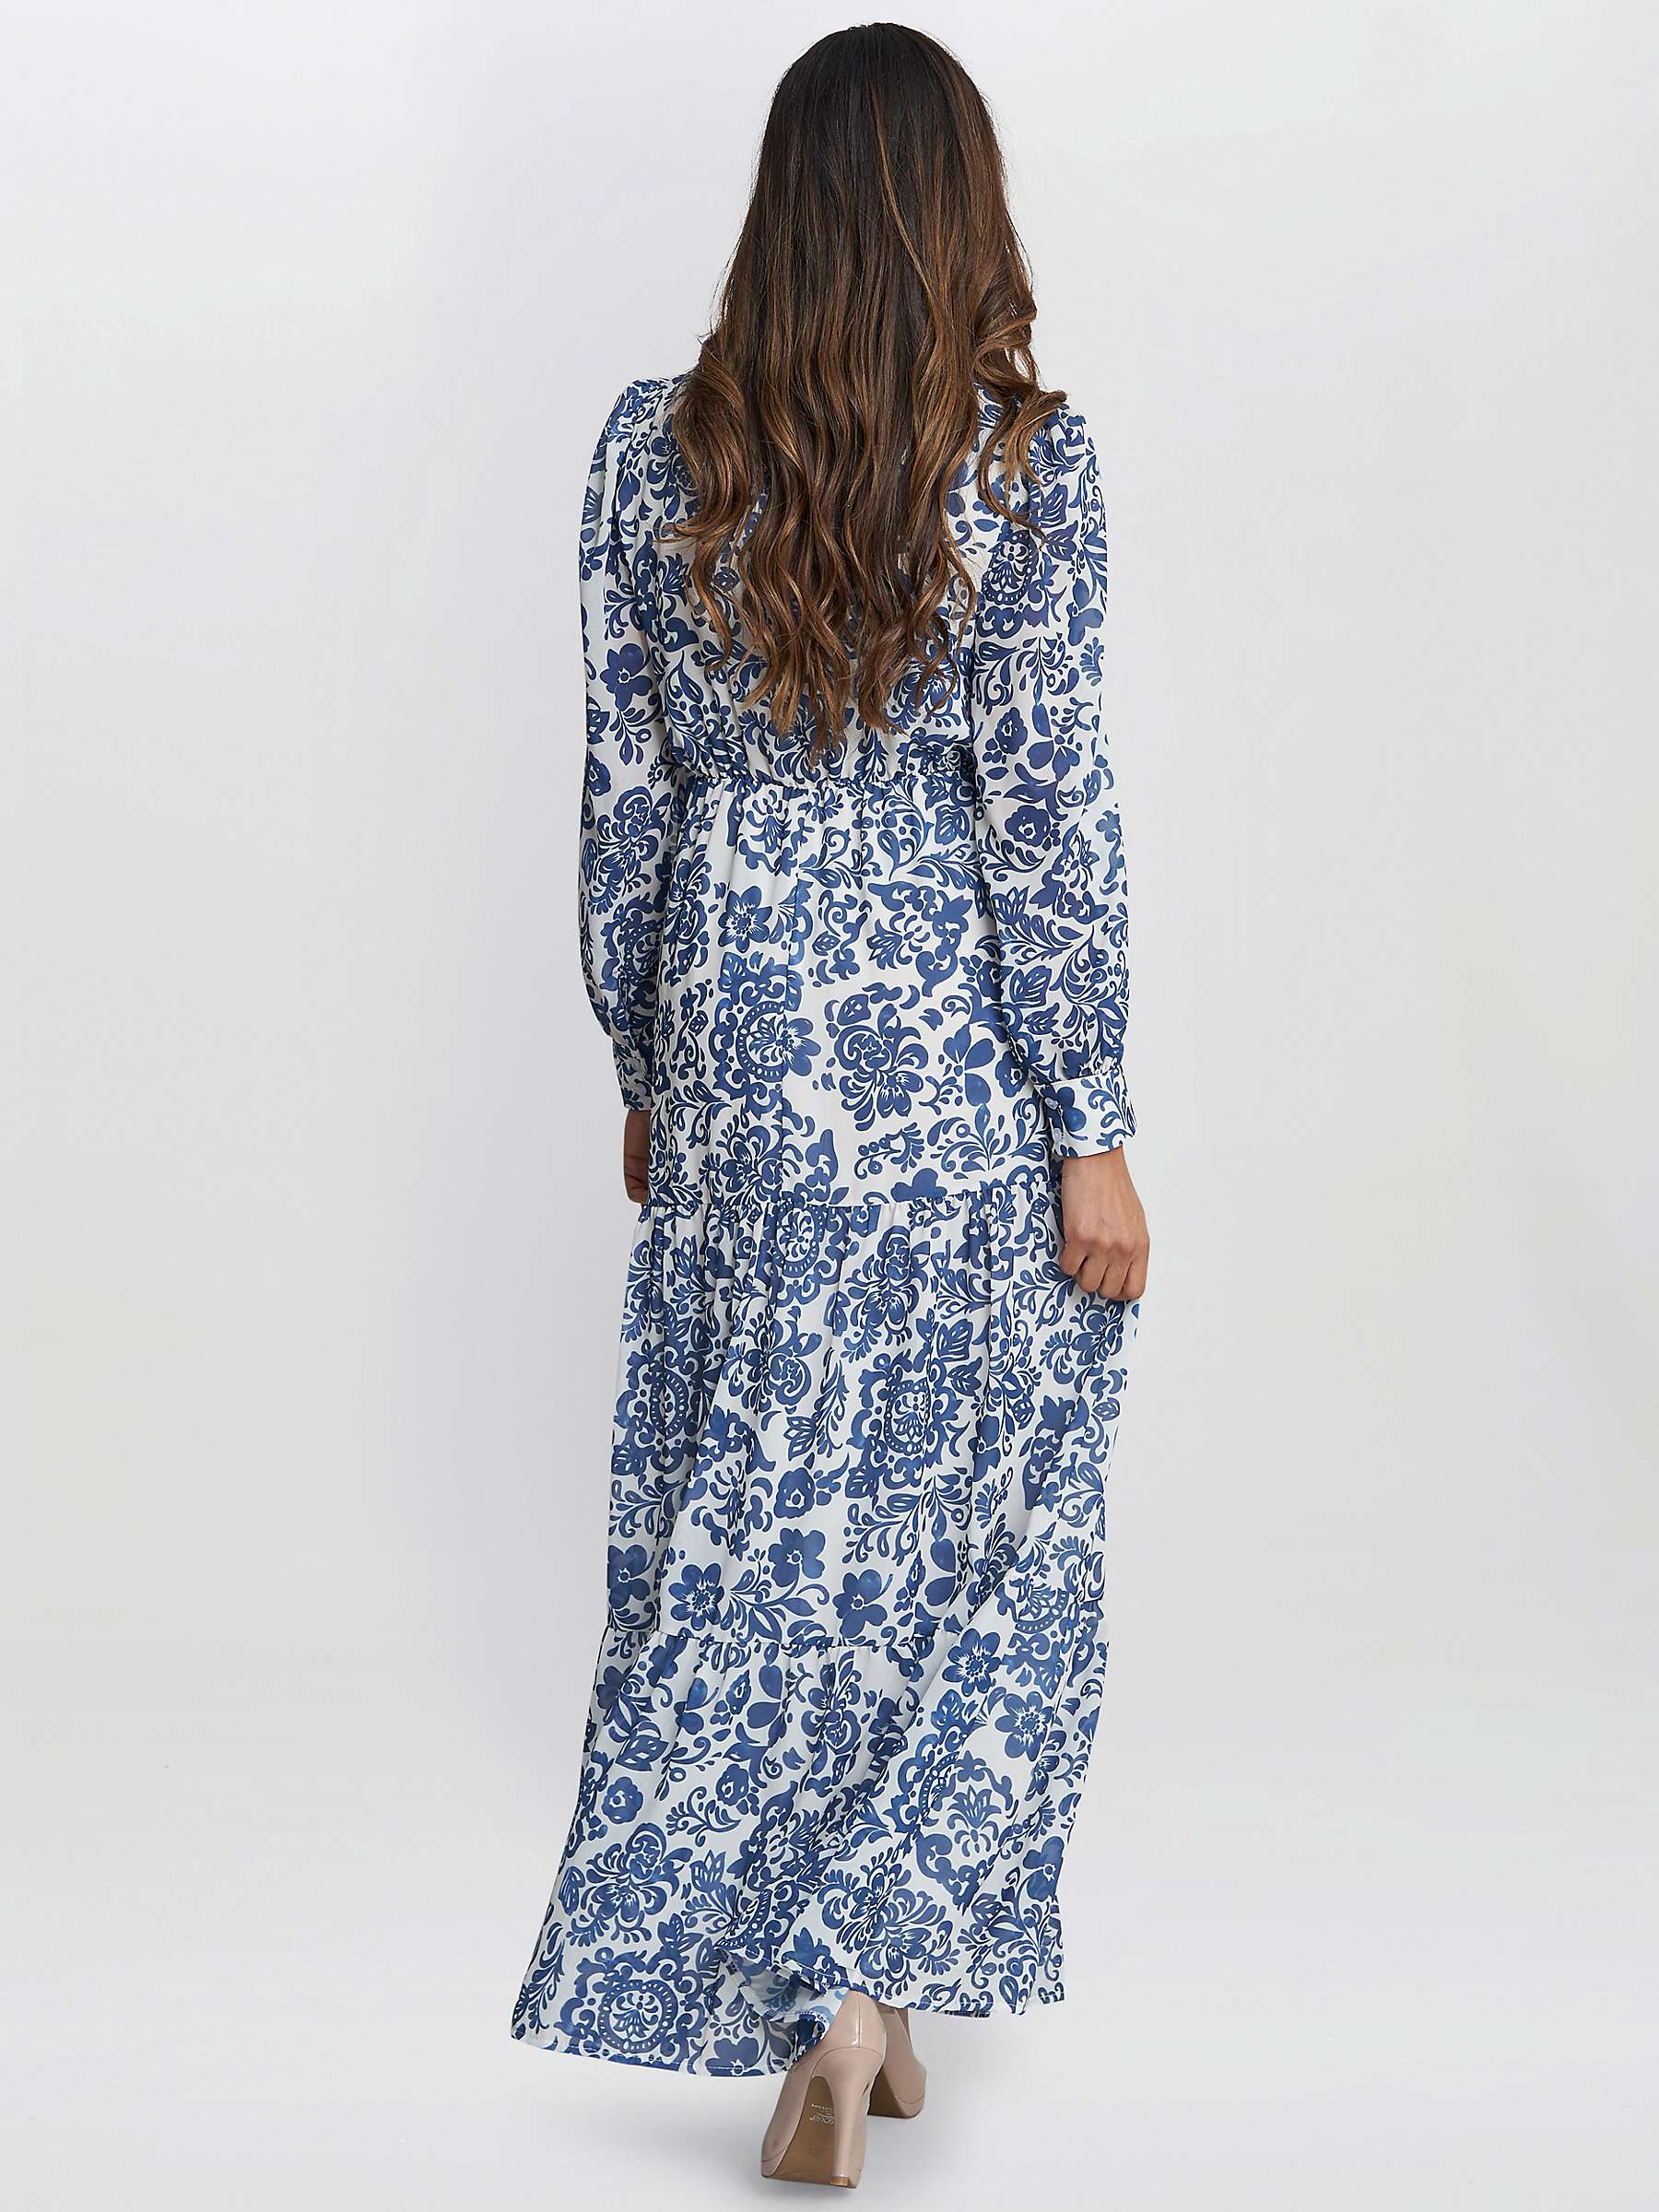 Buy Gina Bacconi Jojo Tiered Floral Maxi Dress, Navy/Cream Online at johnlewis.com